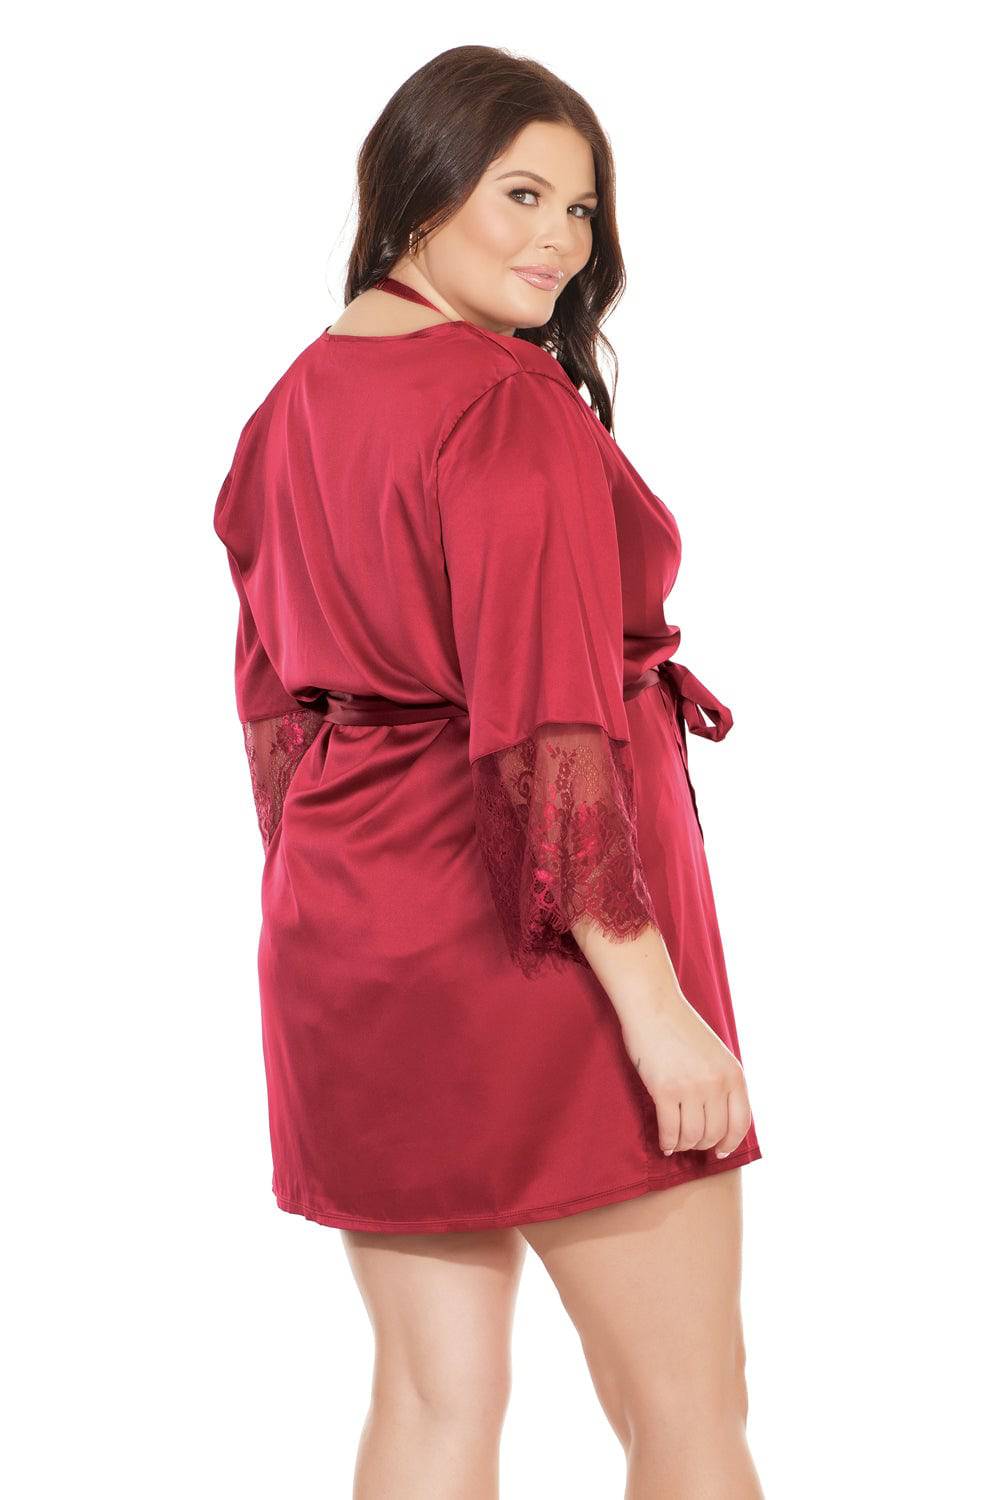 Coquette - 7224X - Satin Robe with Lace Finish - Merlot - OSXL - Stag Shop